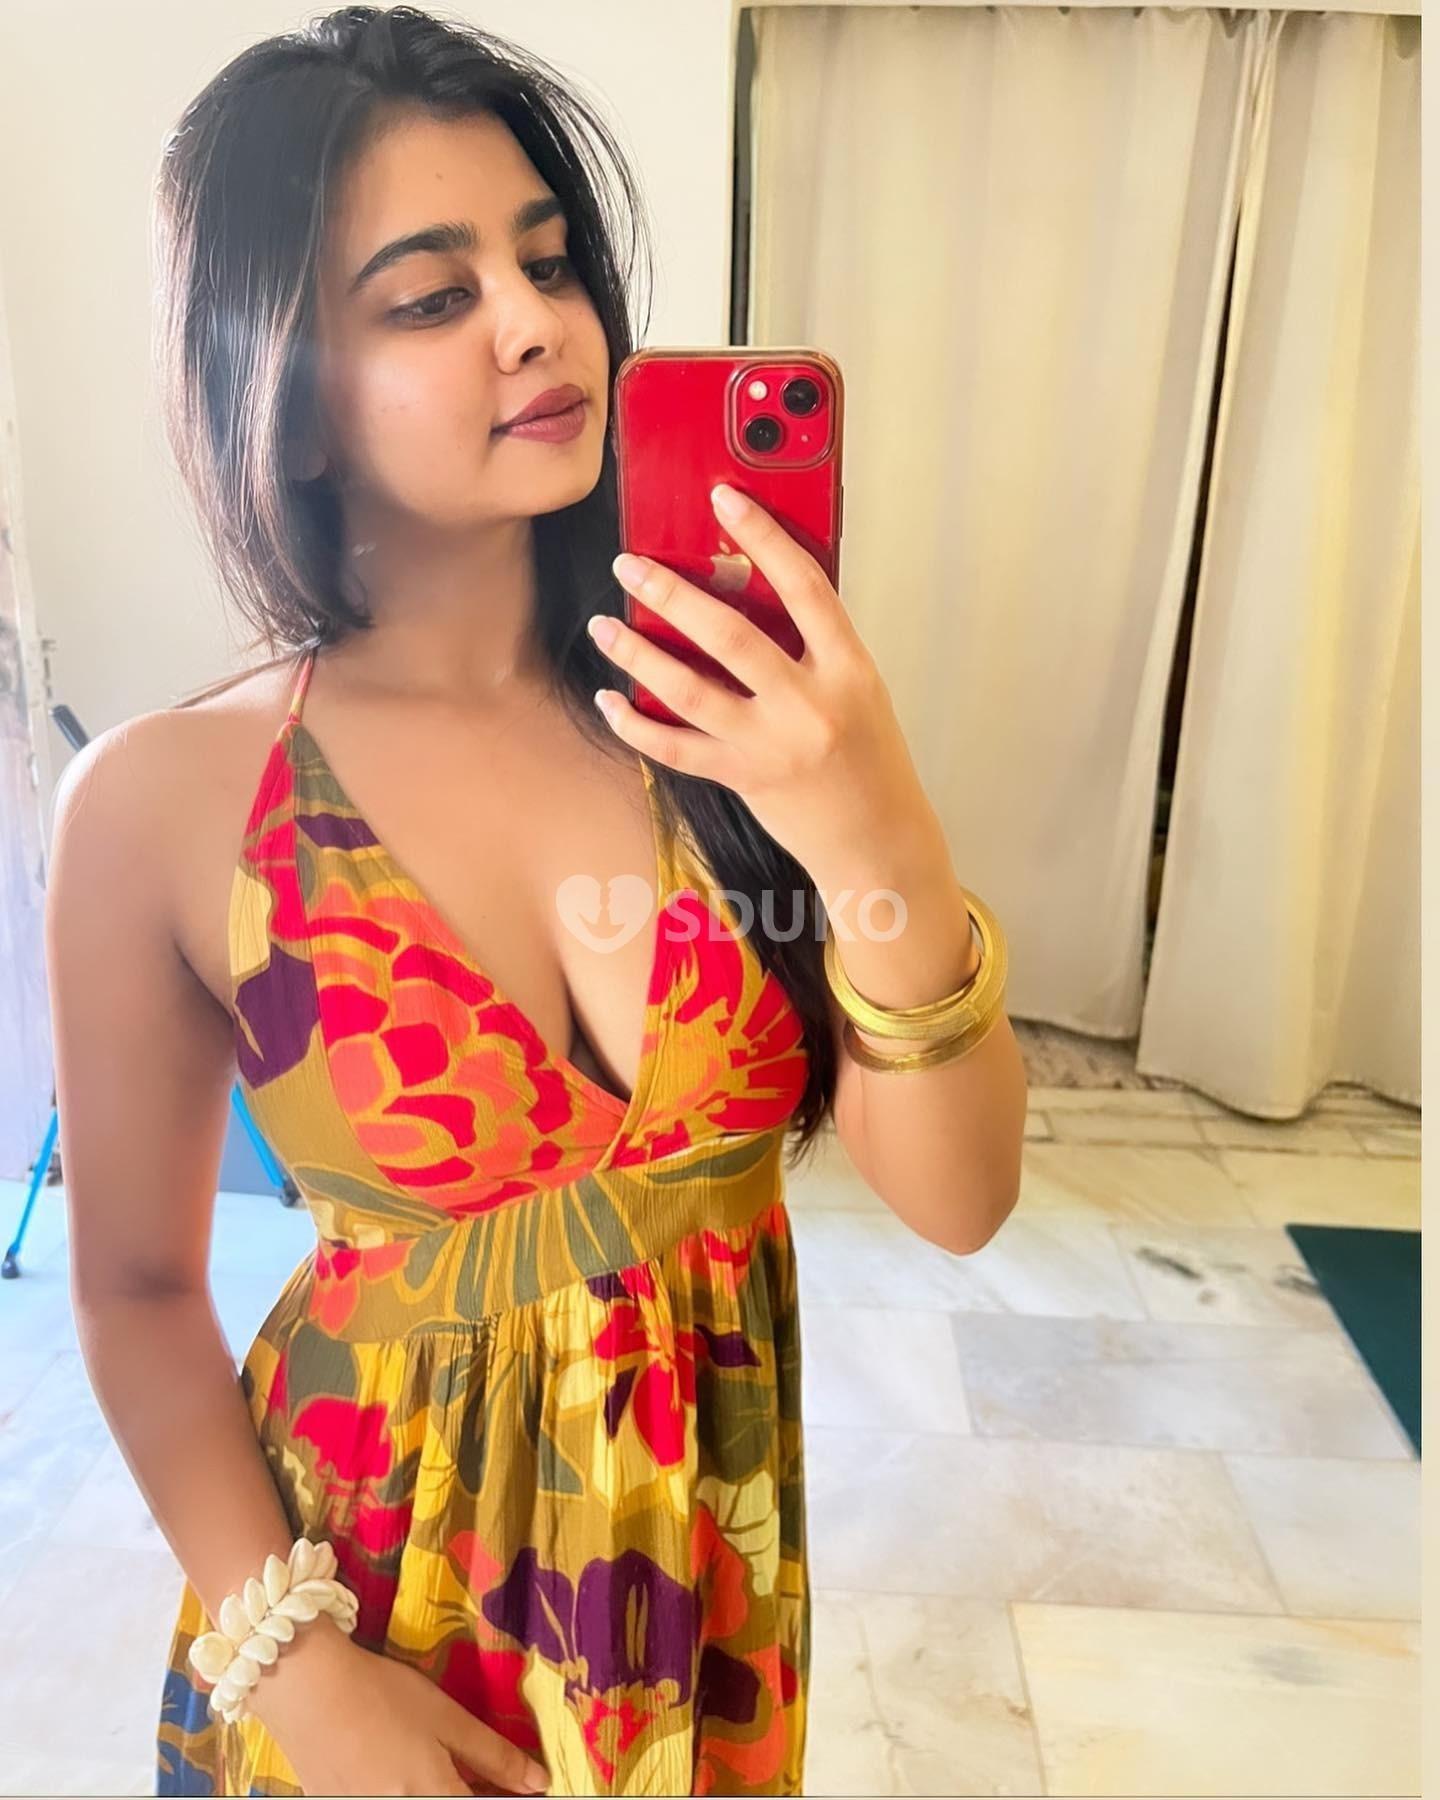 PUNE LOW RATE KAVYA ESCORT FULL HARD FUCK WITH NAUGHTY IF YOU WANT TO FUCK MY PUSSY WITH BIG BOOBS GIRLS- CALL AND WHATS